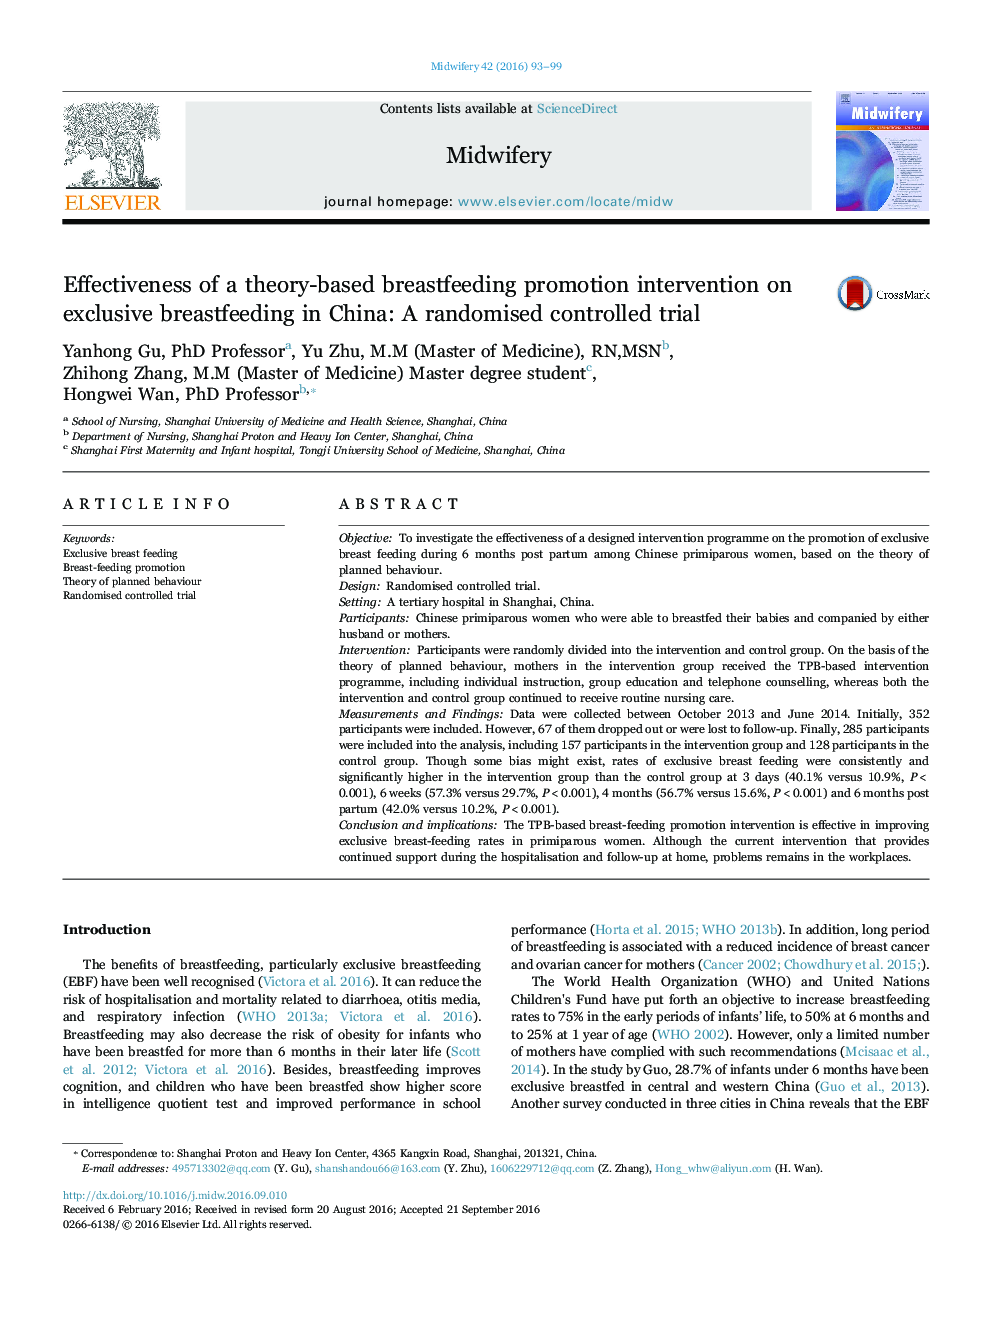 Effectiveness of a theory-based breastfeeding promotion intervention on exclusive breastfeeding in China: A randomised controlled trial